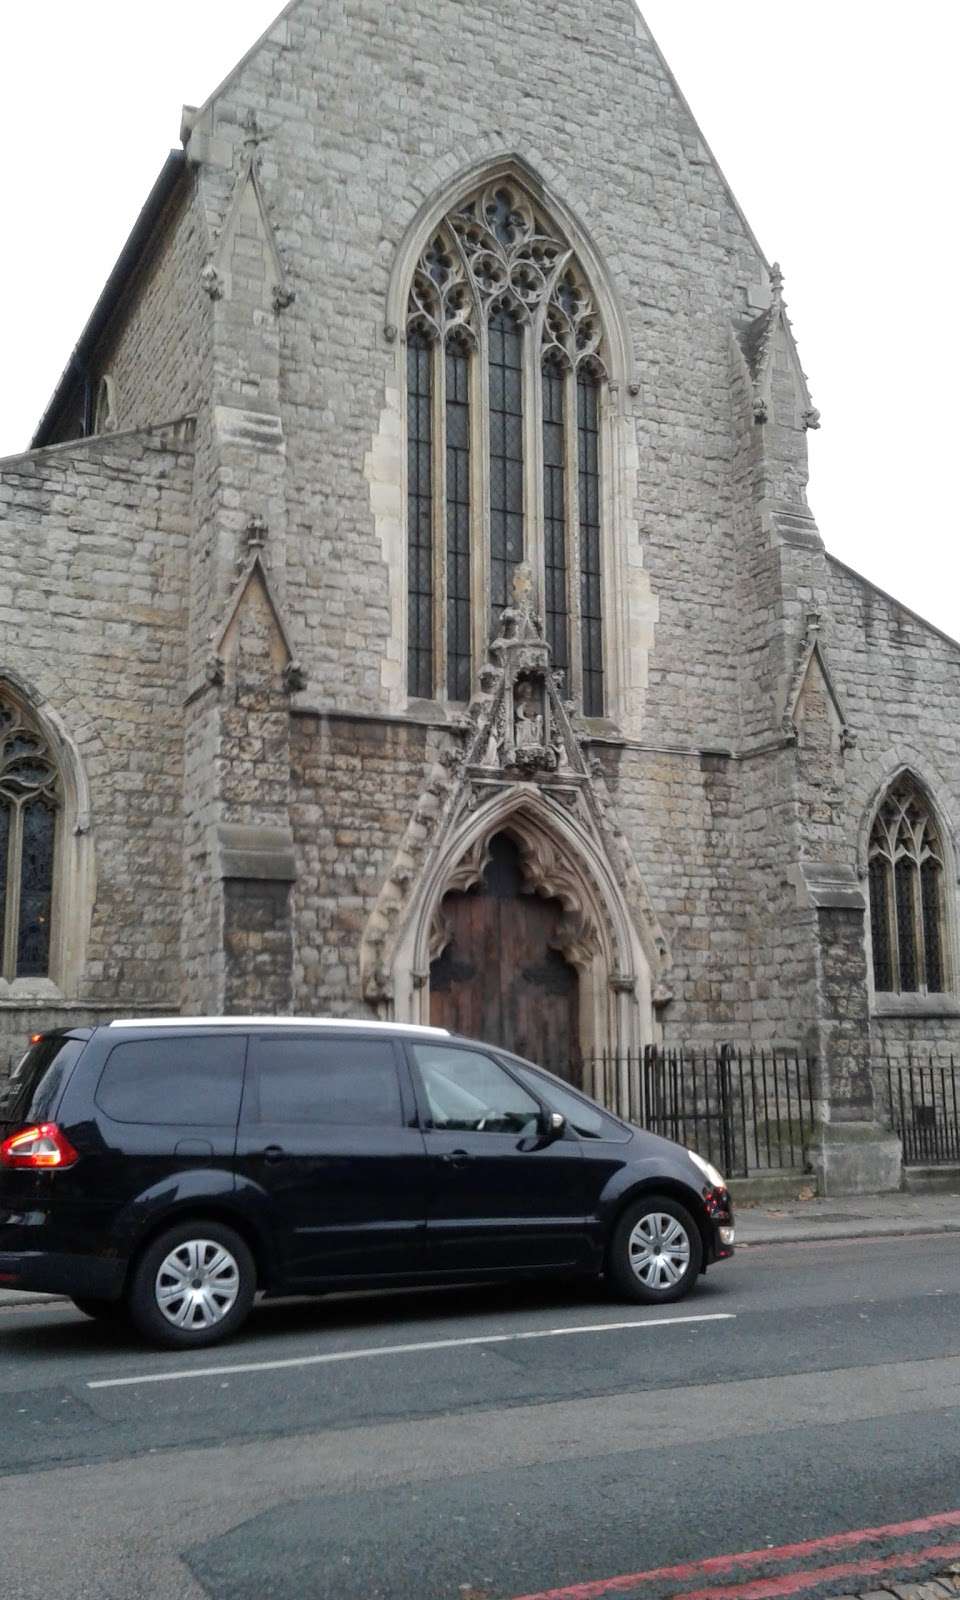 St. Mary’s Catholic Church of Our Lady of Victories | 8 Clapham Park Rd, London SW4 7AP, UK | Phone: 020 7498 3005